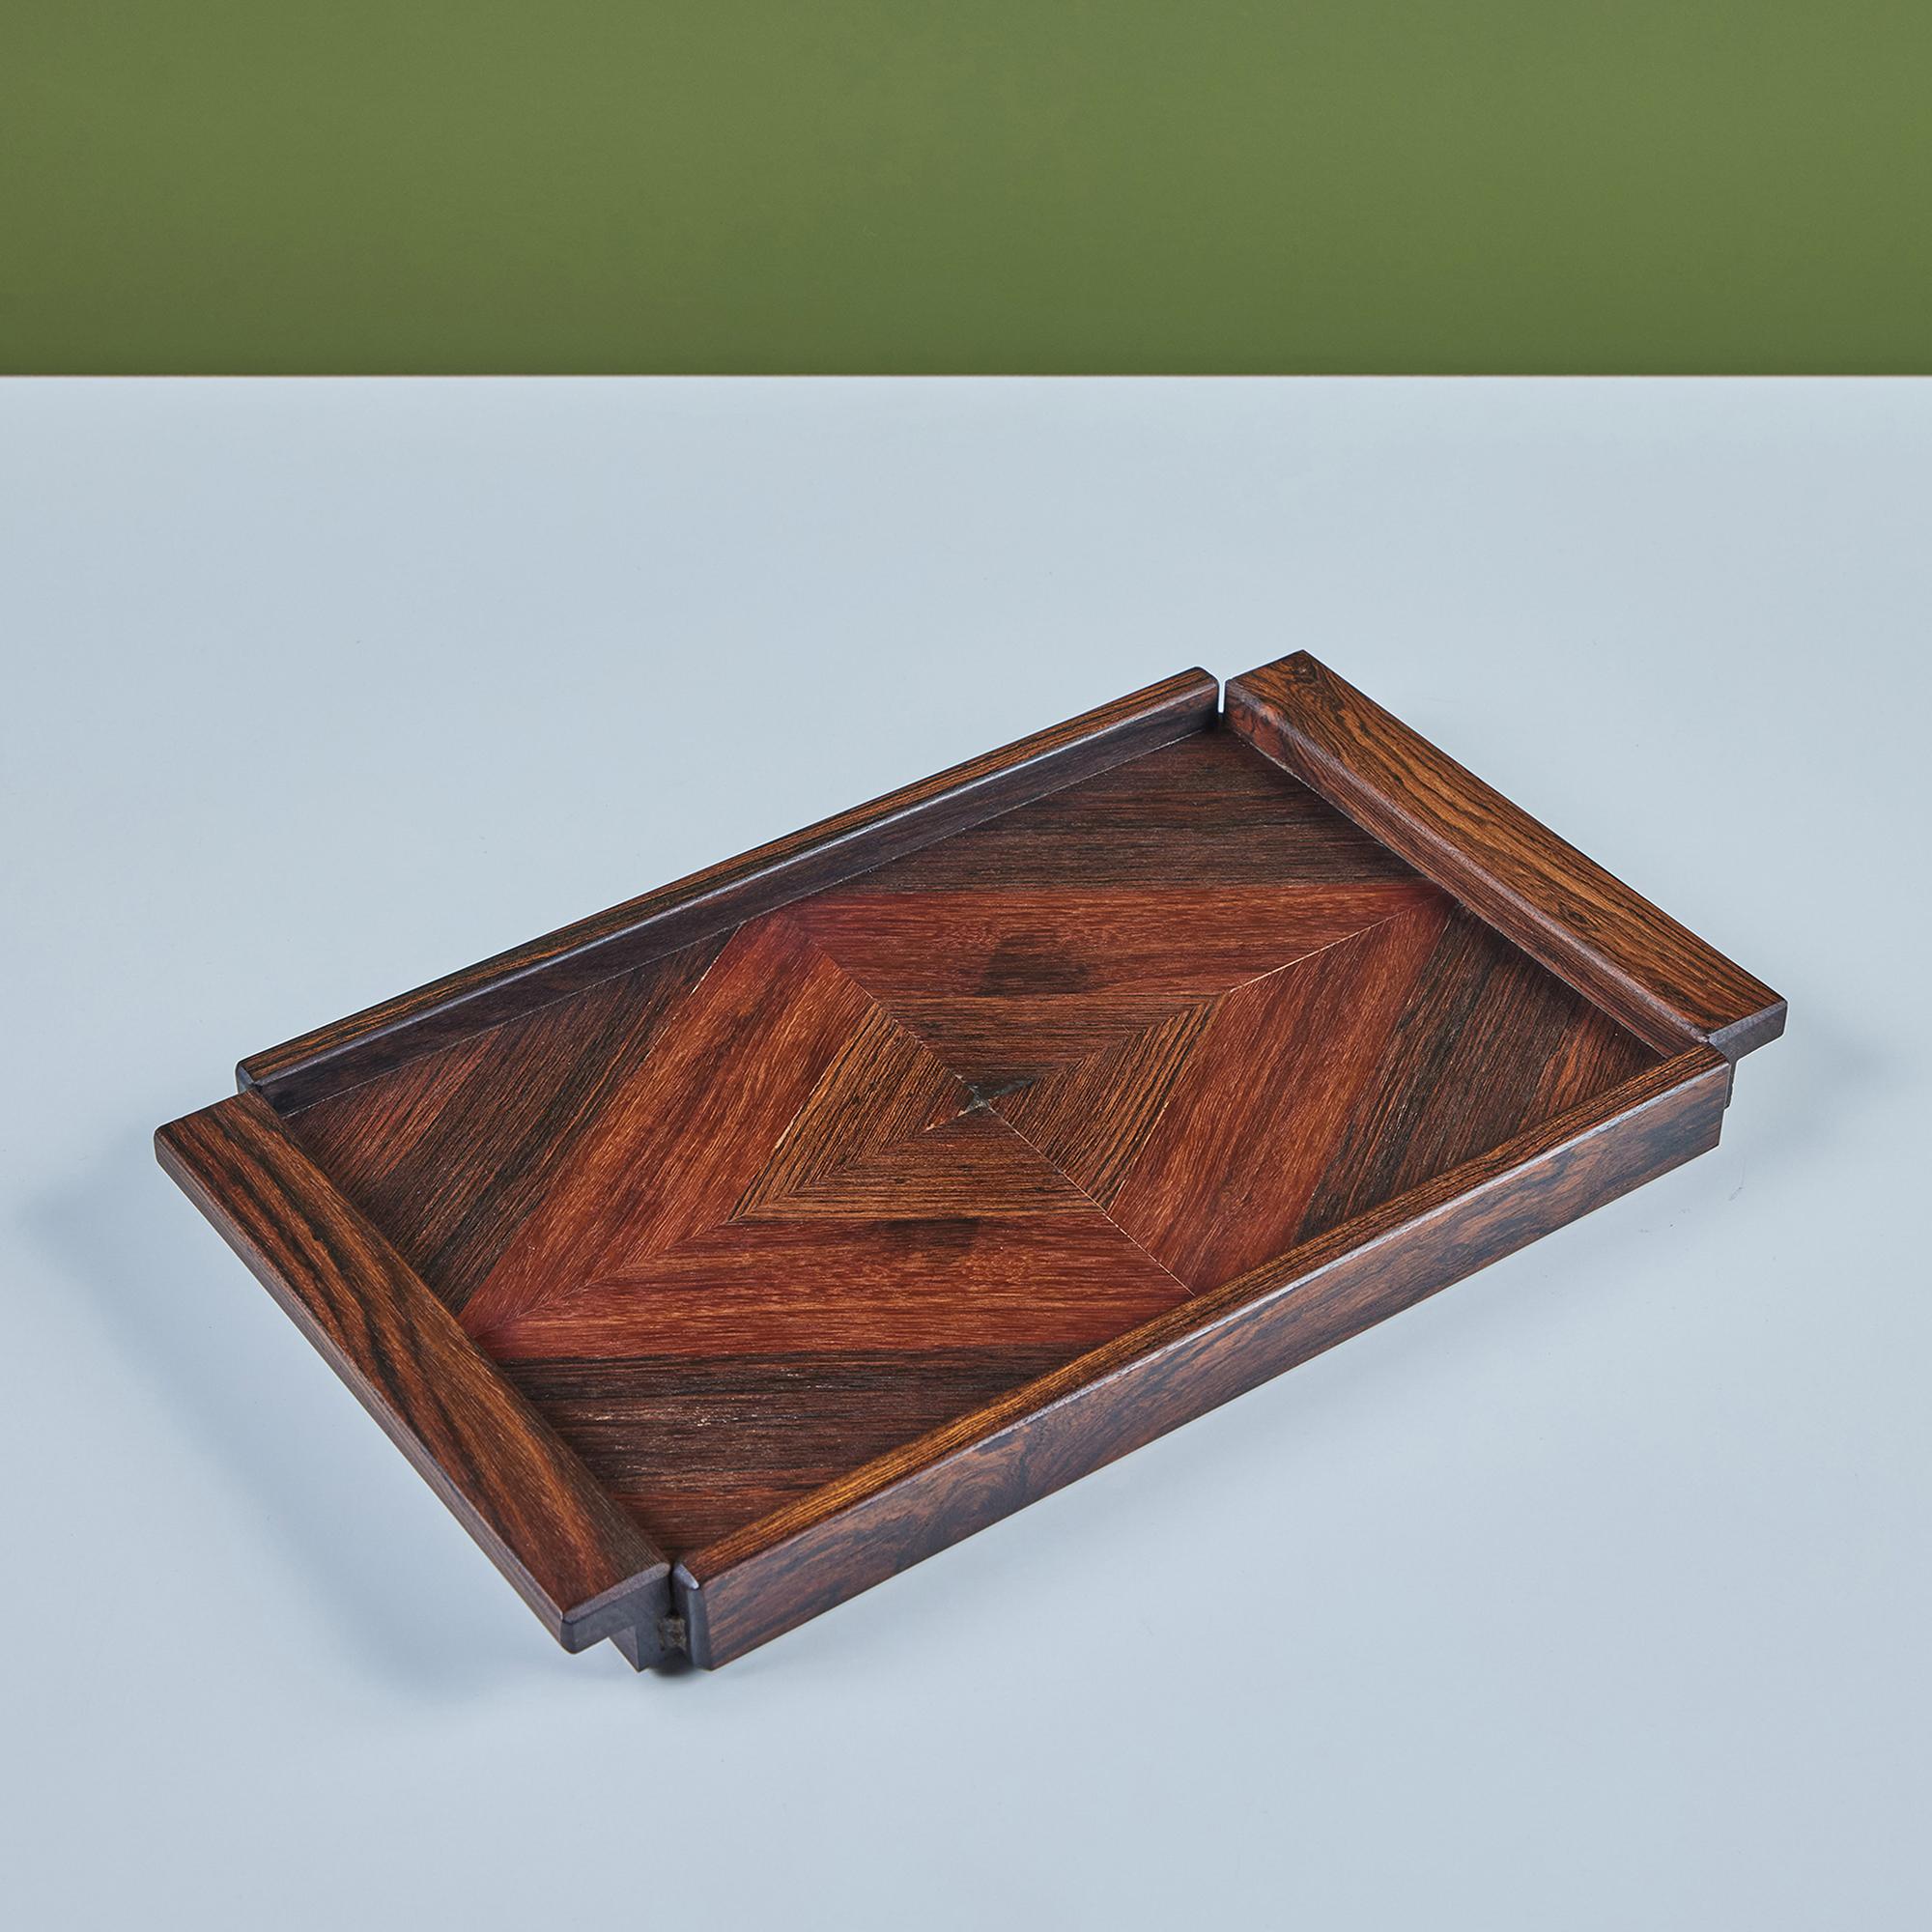 Serving tray by Don Shoemaker for Senal of Mexico. The tray has a dark rosewood frame with integrated handles at either end, and the tray surface is inlaid with precious wood veneer in a diamond pattern. 

CITES Notice: Due to stringent regulations